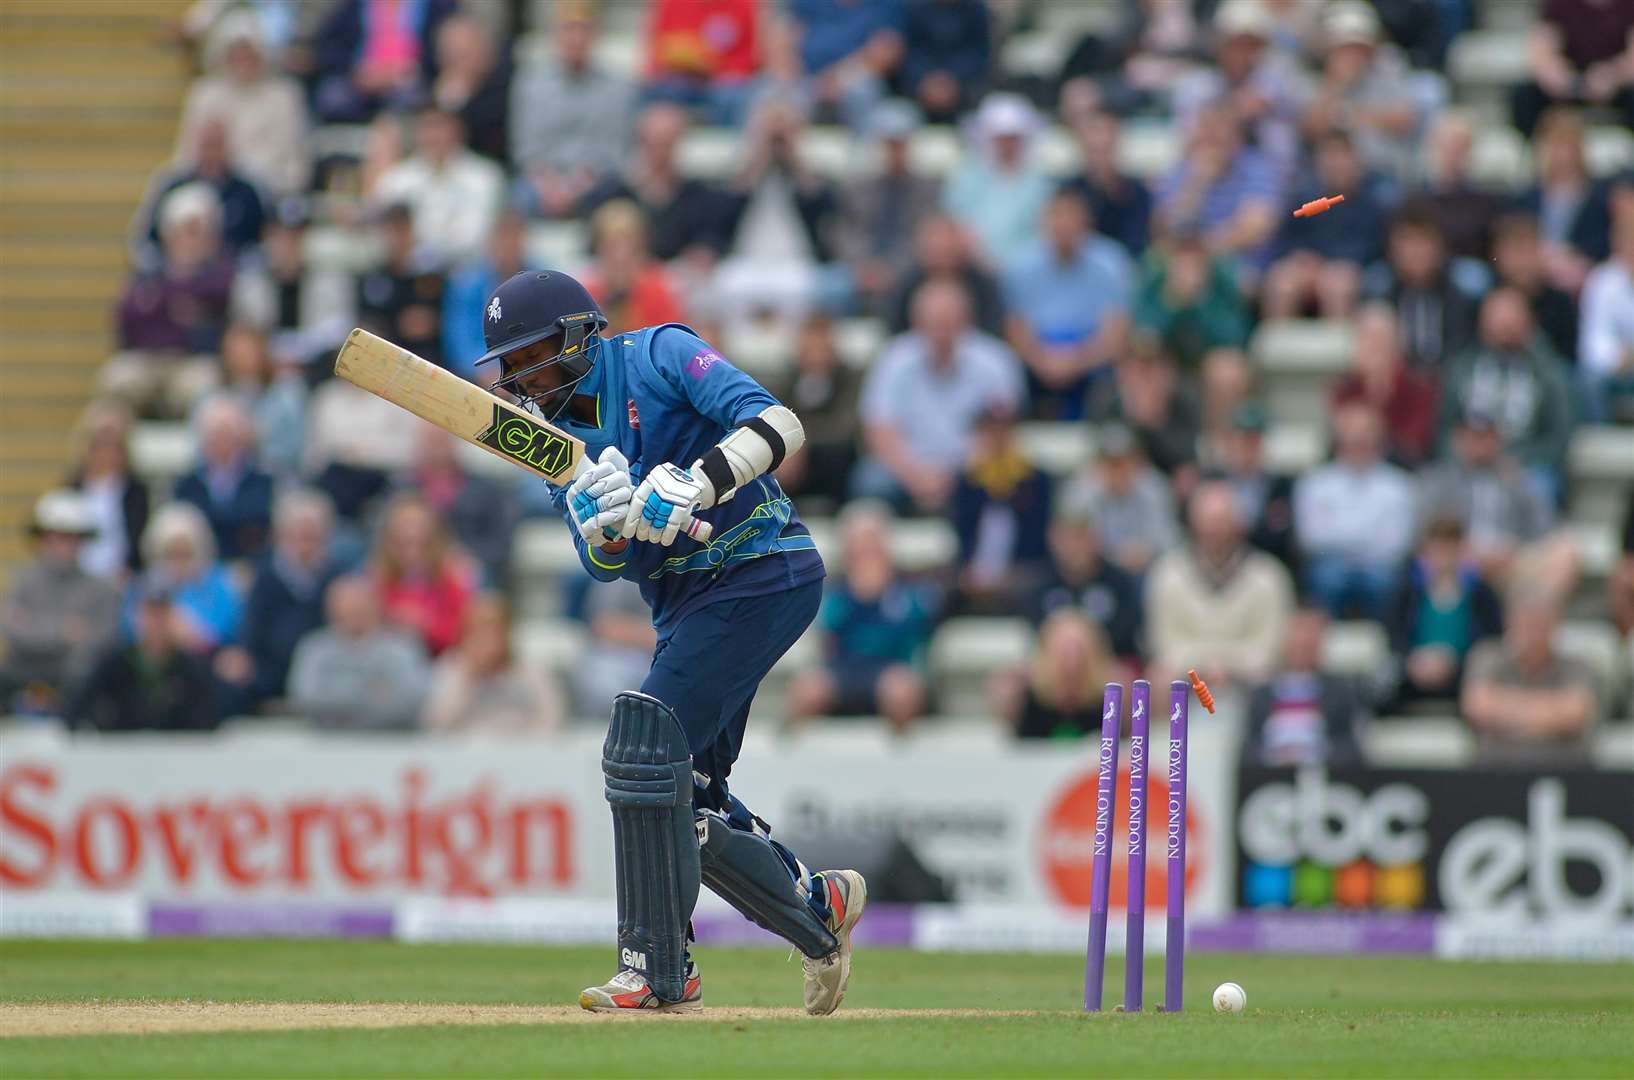 Daniel Bell Drummond is out for just one run, bowled by Dillon Pennington Picture: Ady Kerry